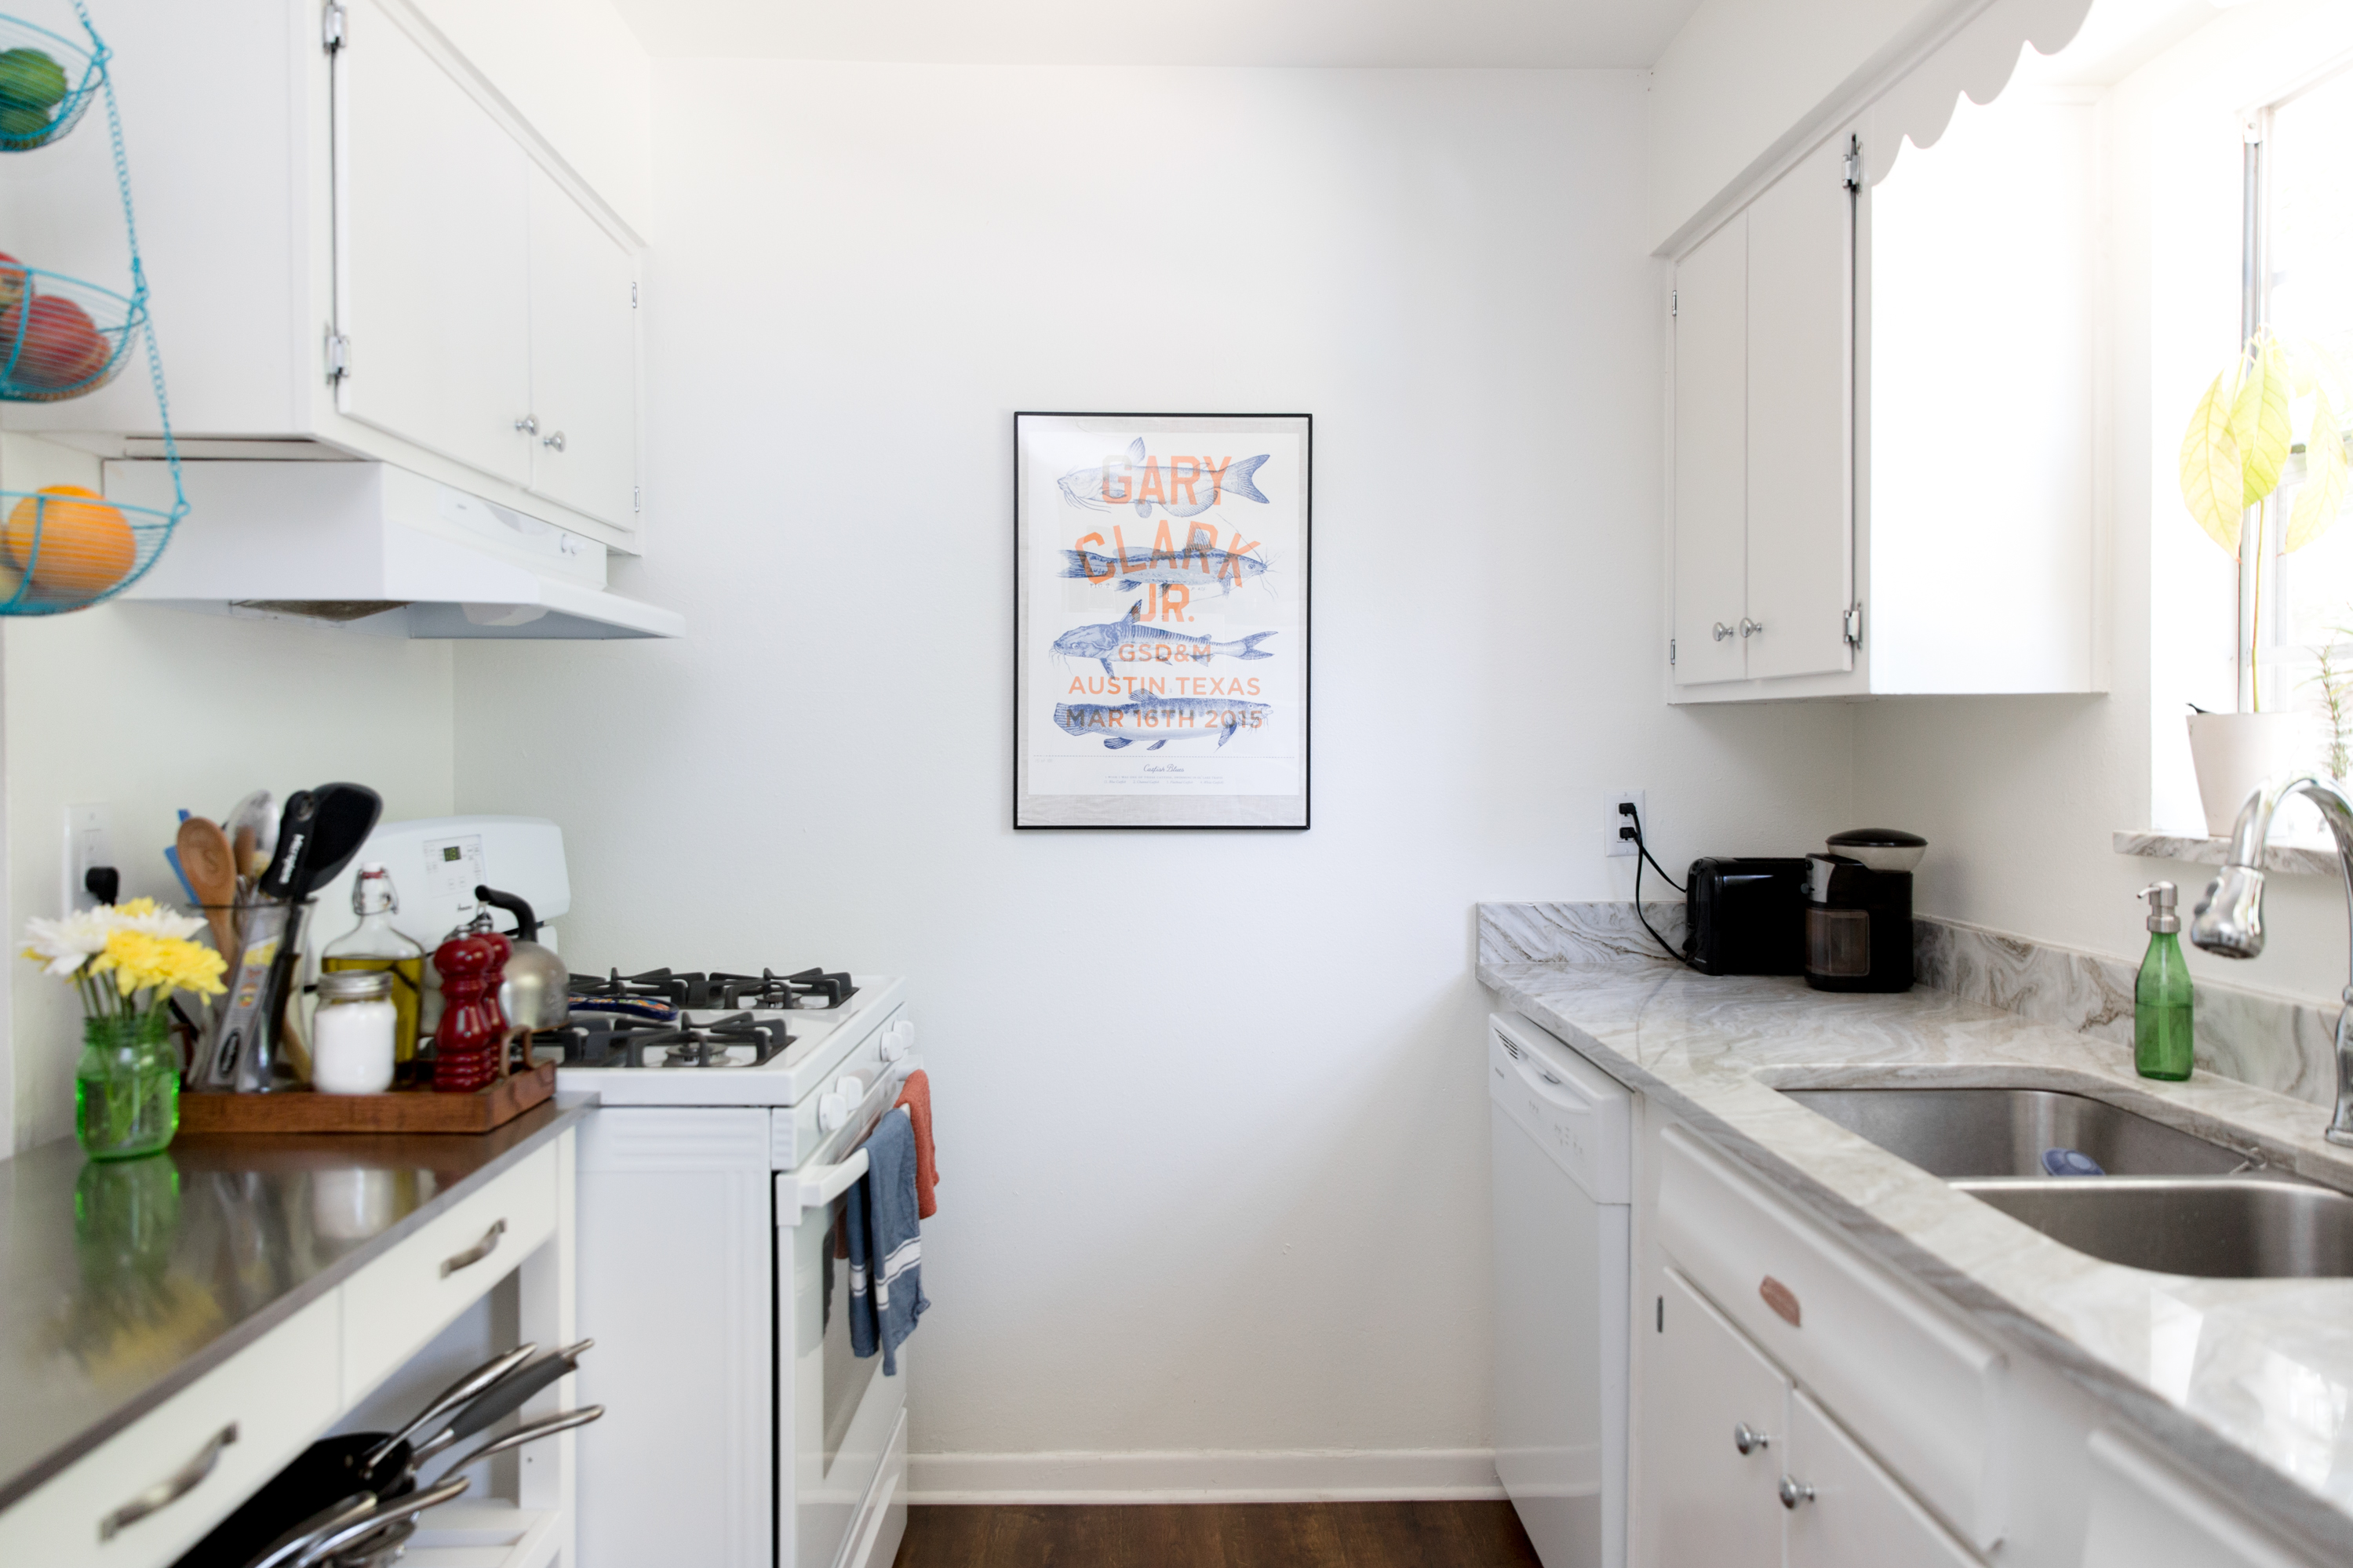 Make it Count: Smart Uses for the Space Below Upper Kitchen